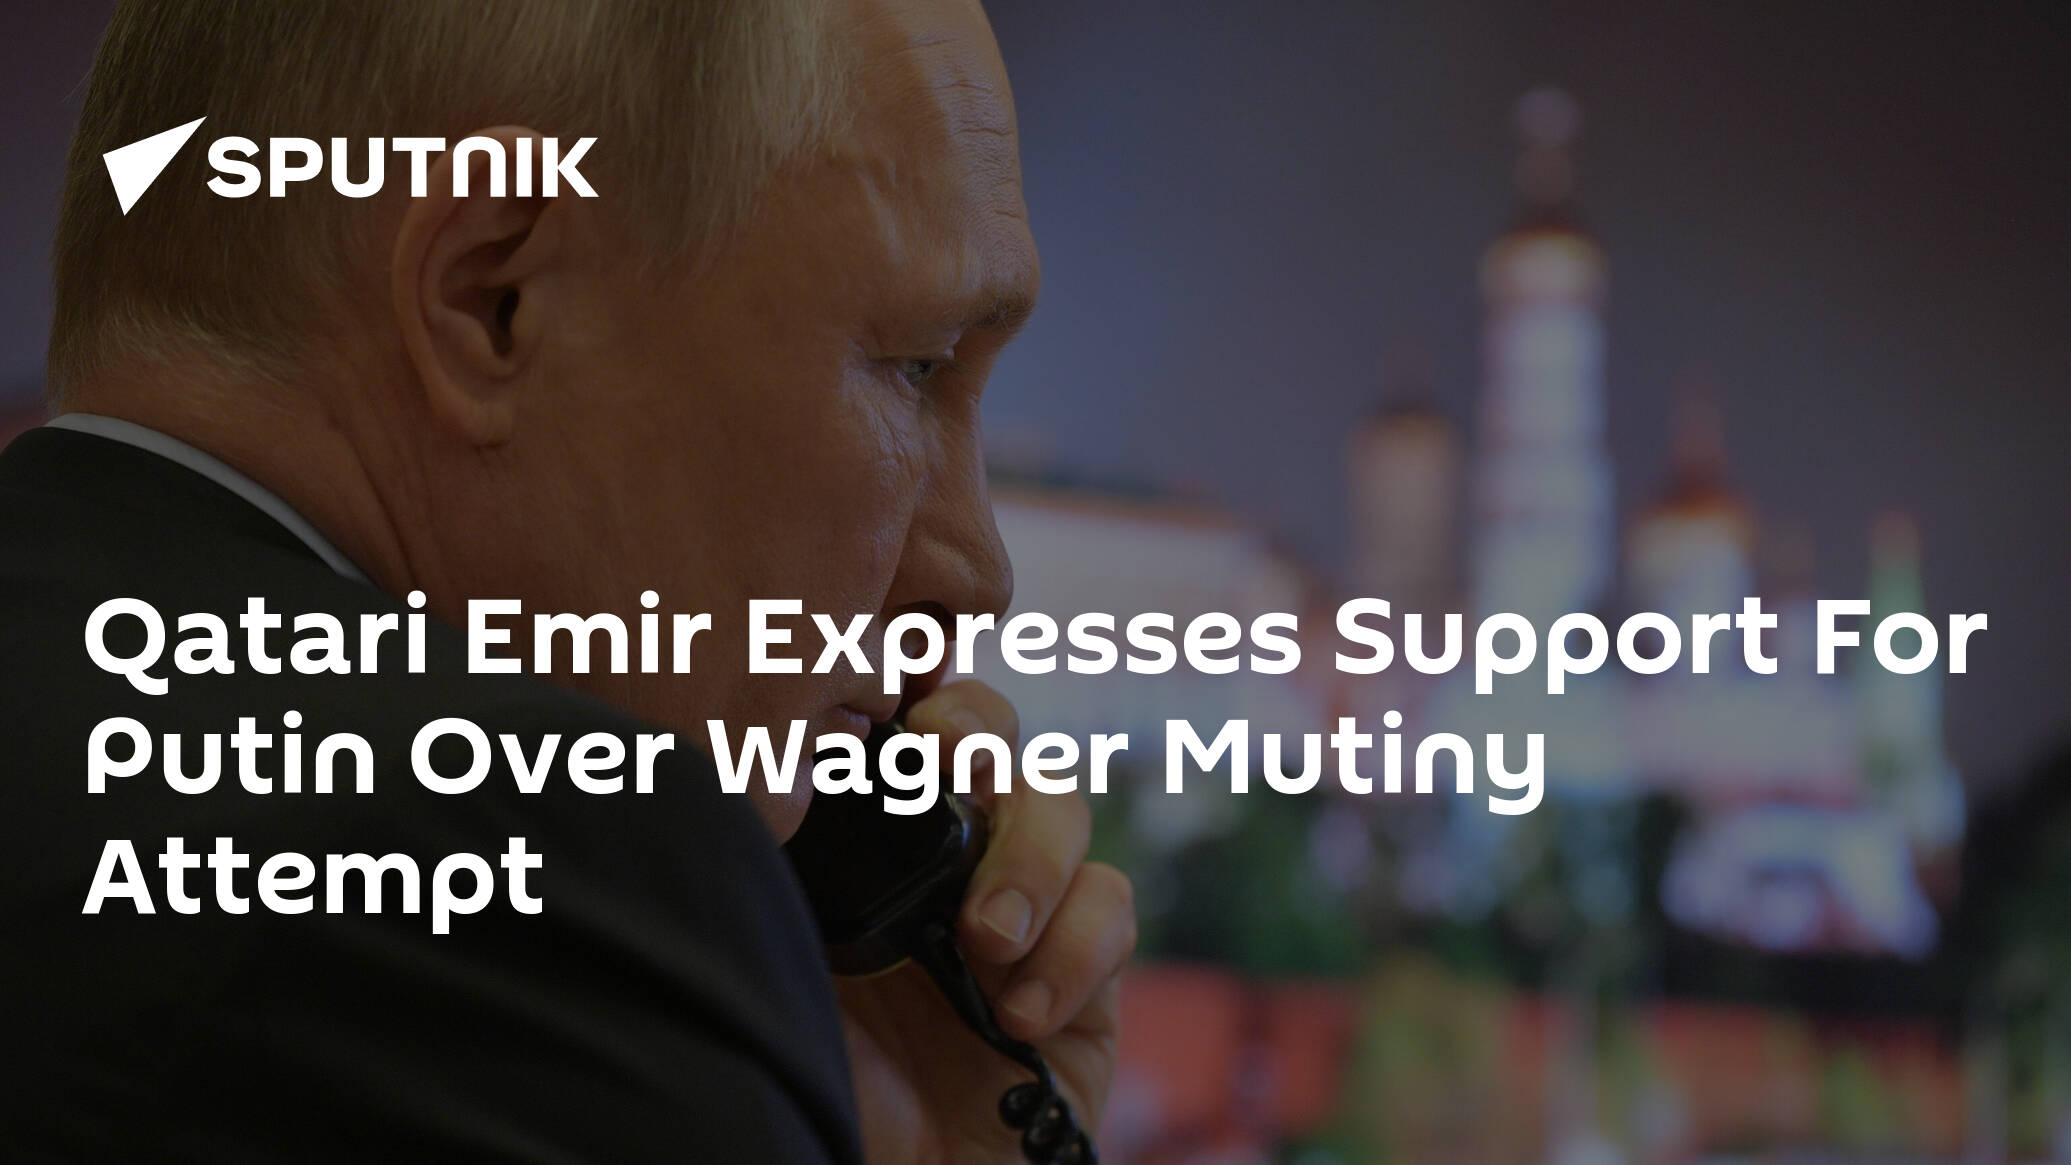 Qatari Emir Expresses Support For Putin Over Wagner Mutiny Attempt